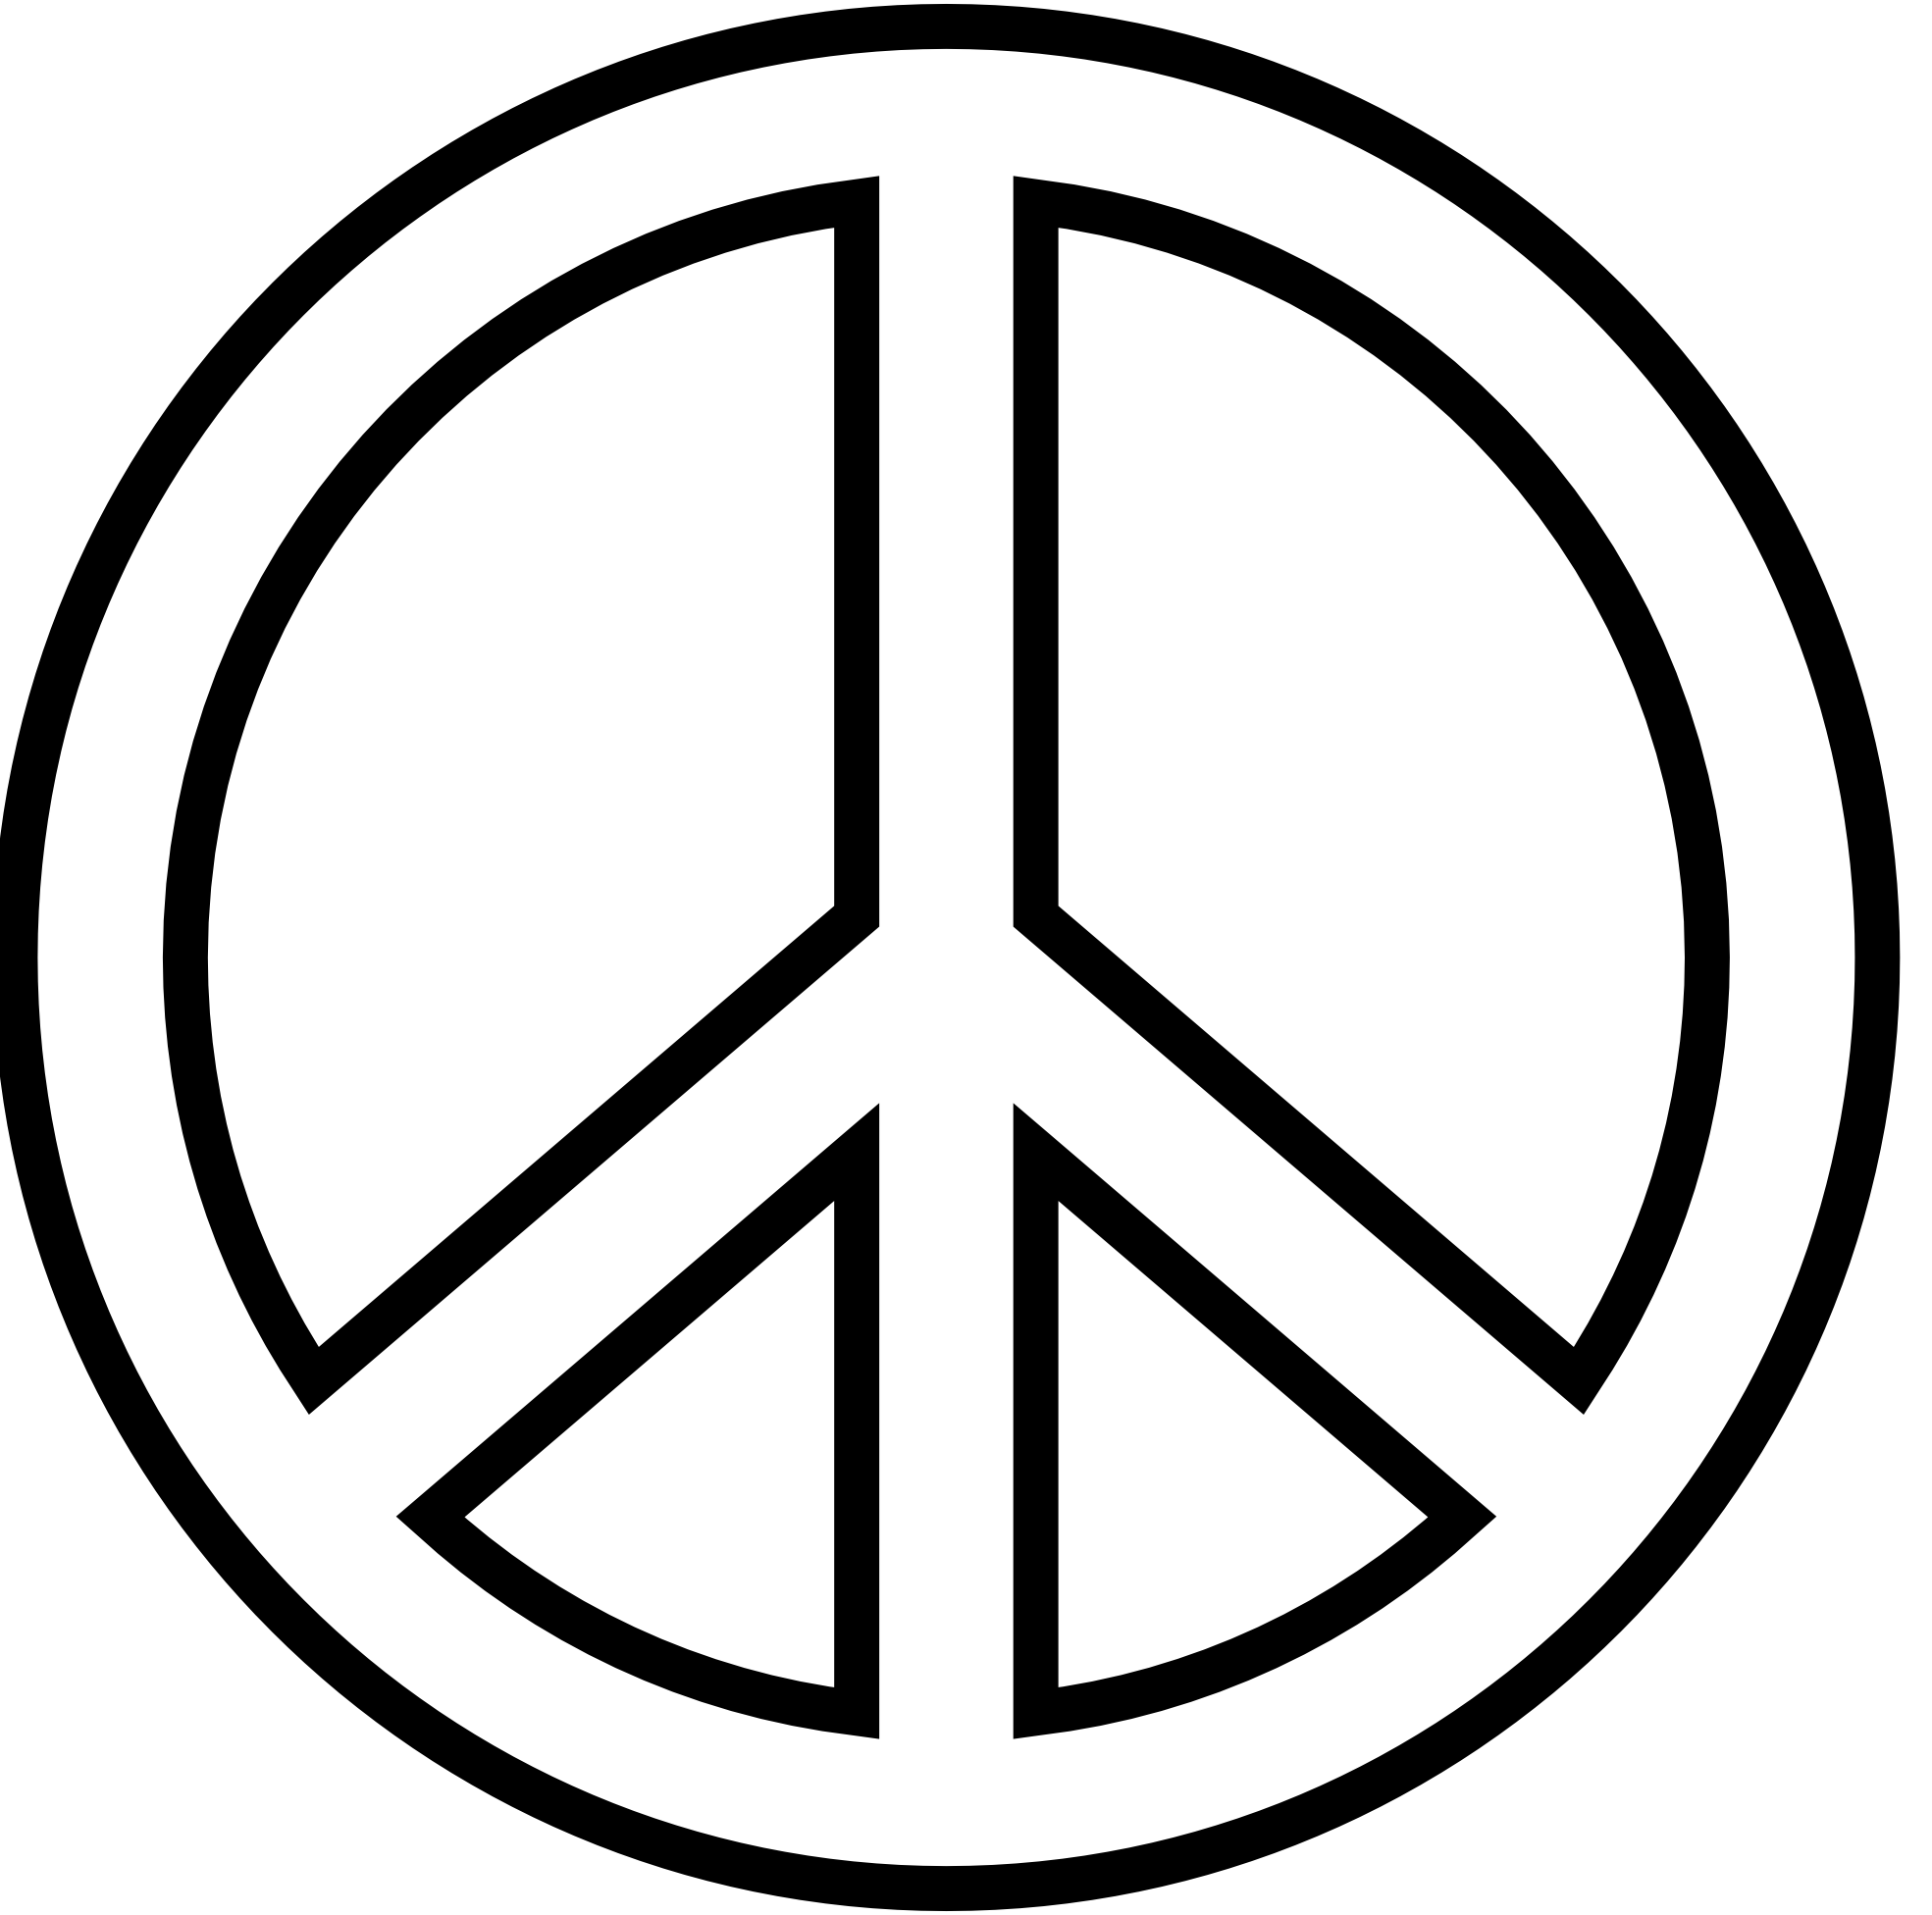 Vector Peace Sign - ClipArt Best